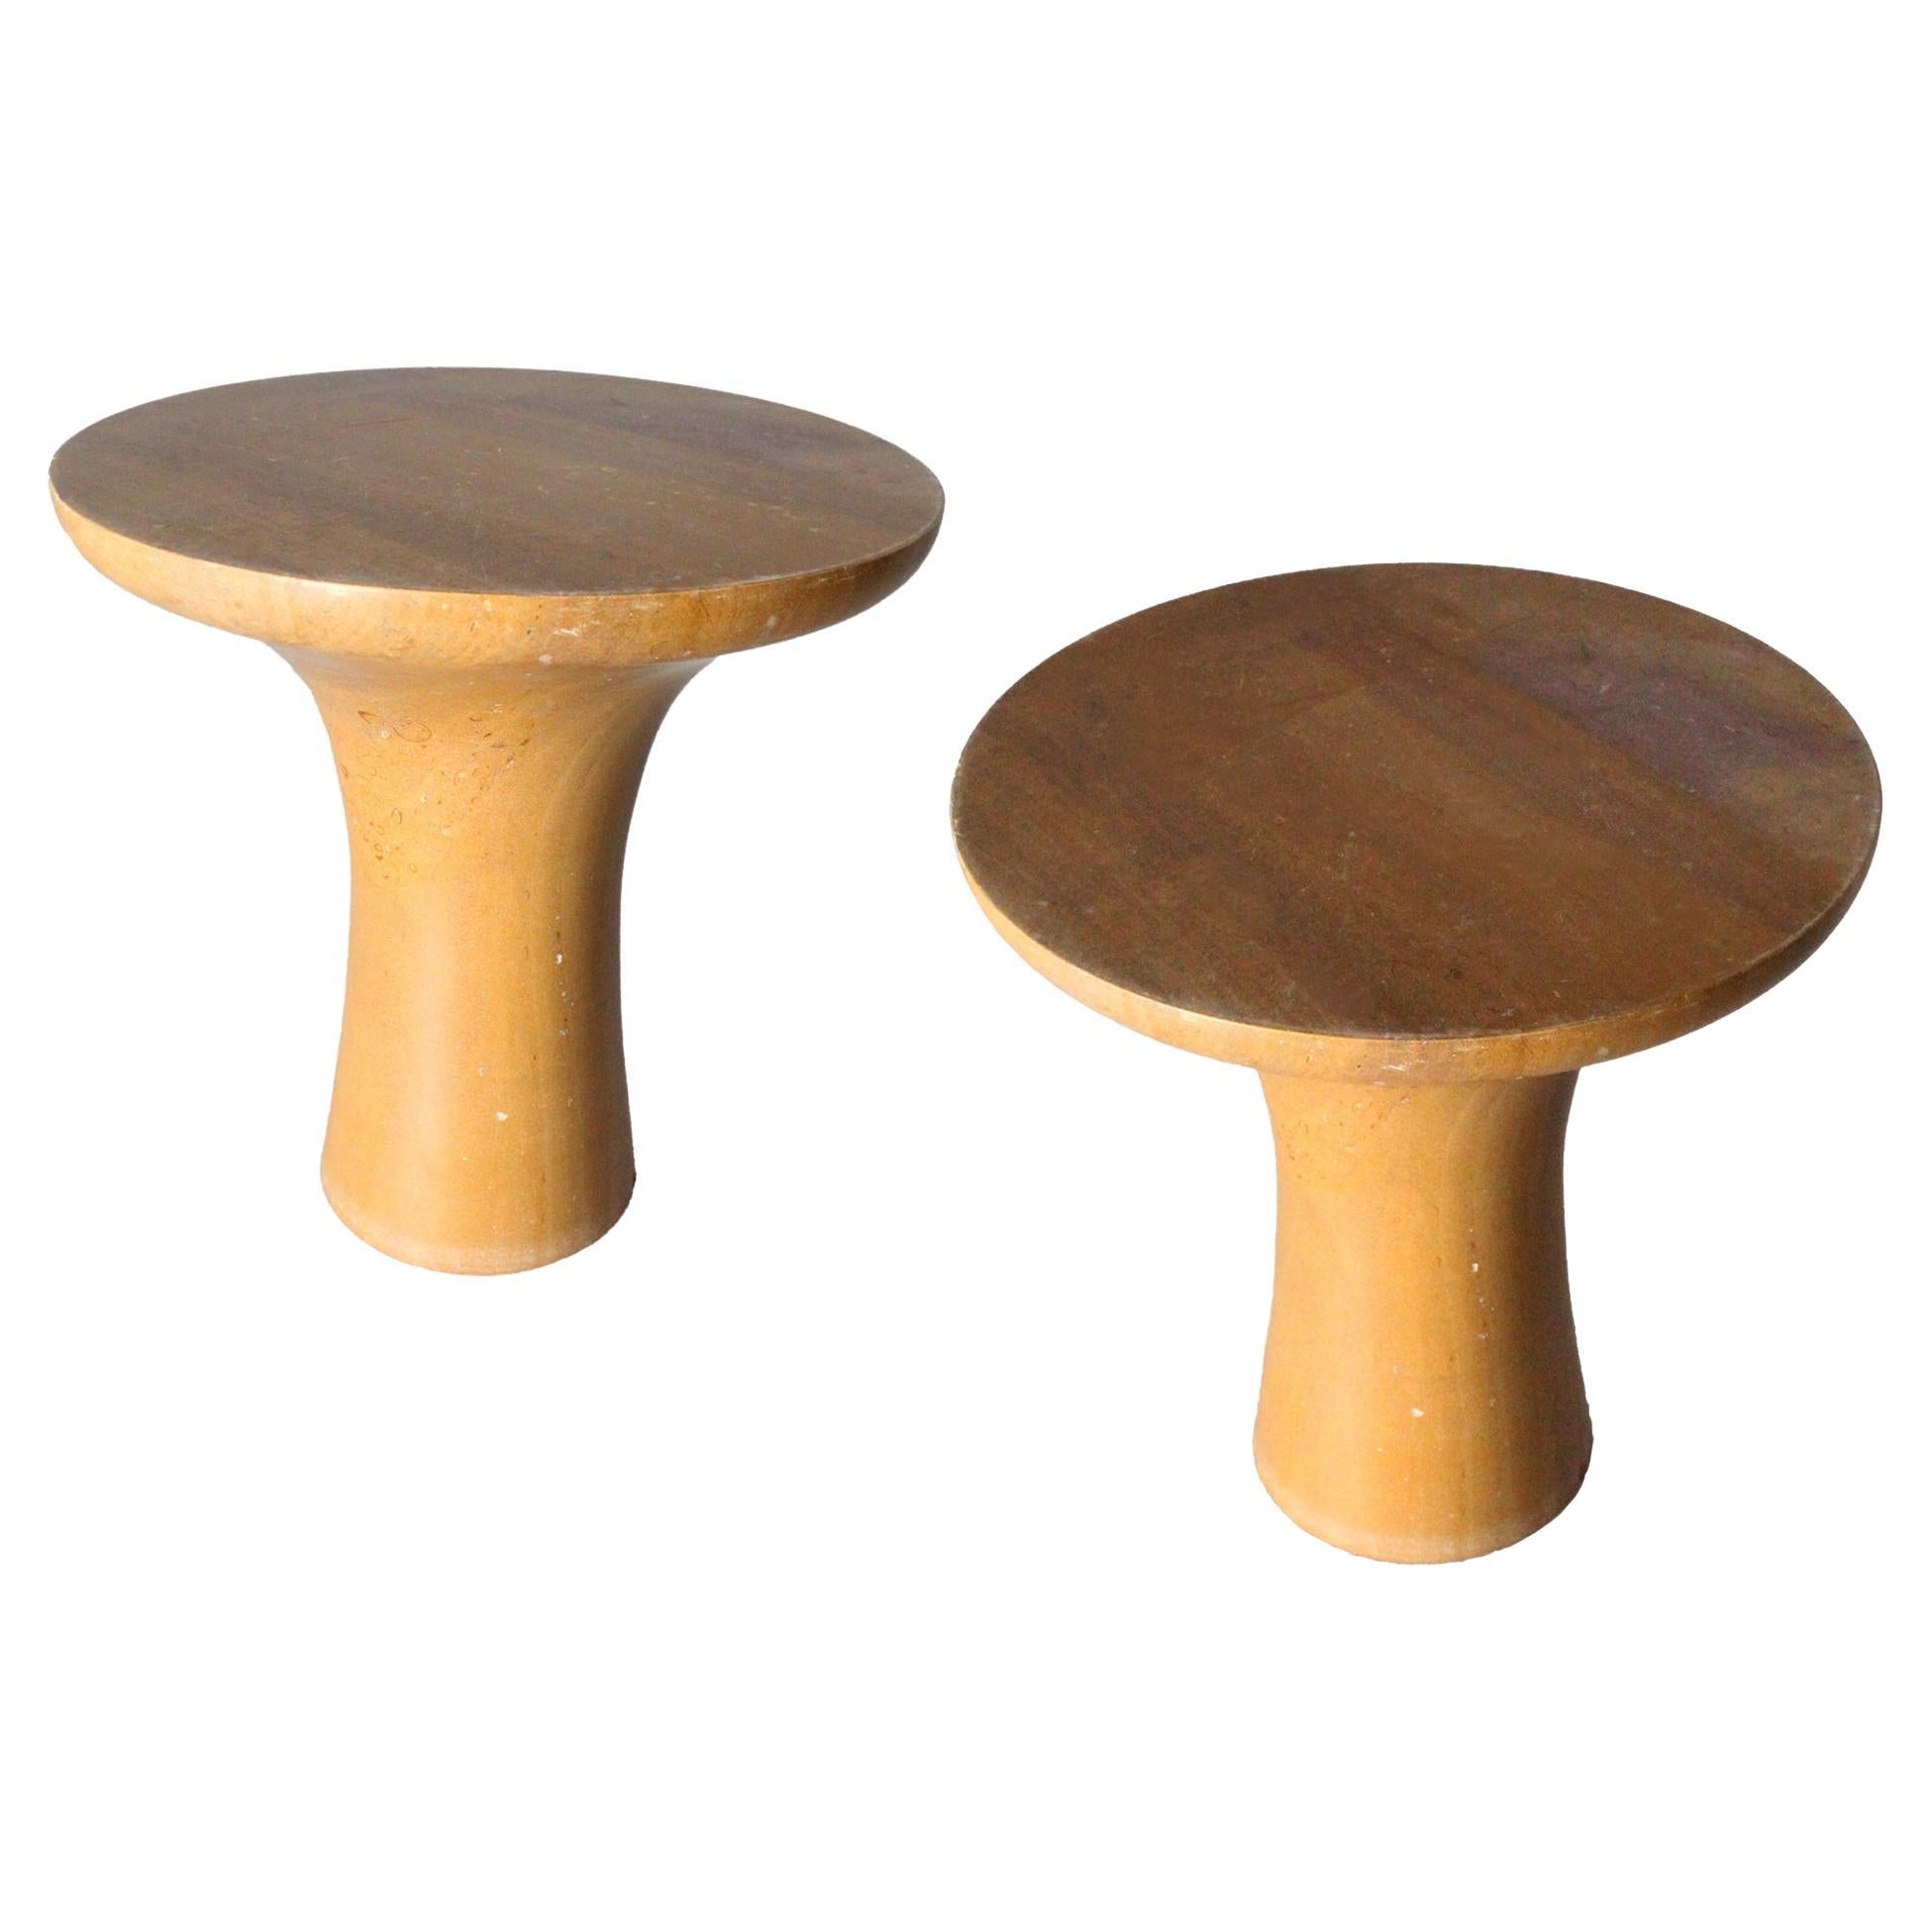 Set of Two Tabla Tables in Jaisalmer Stone Handcrafted in India by Paul Mathieu For Sale